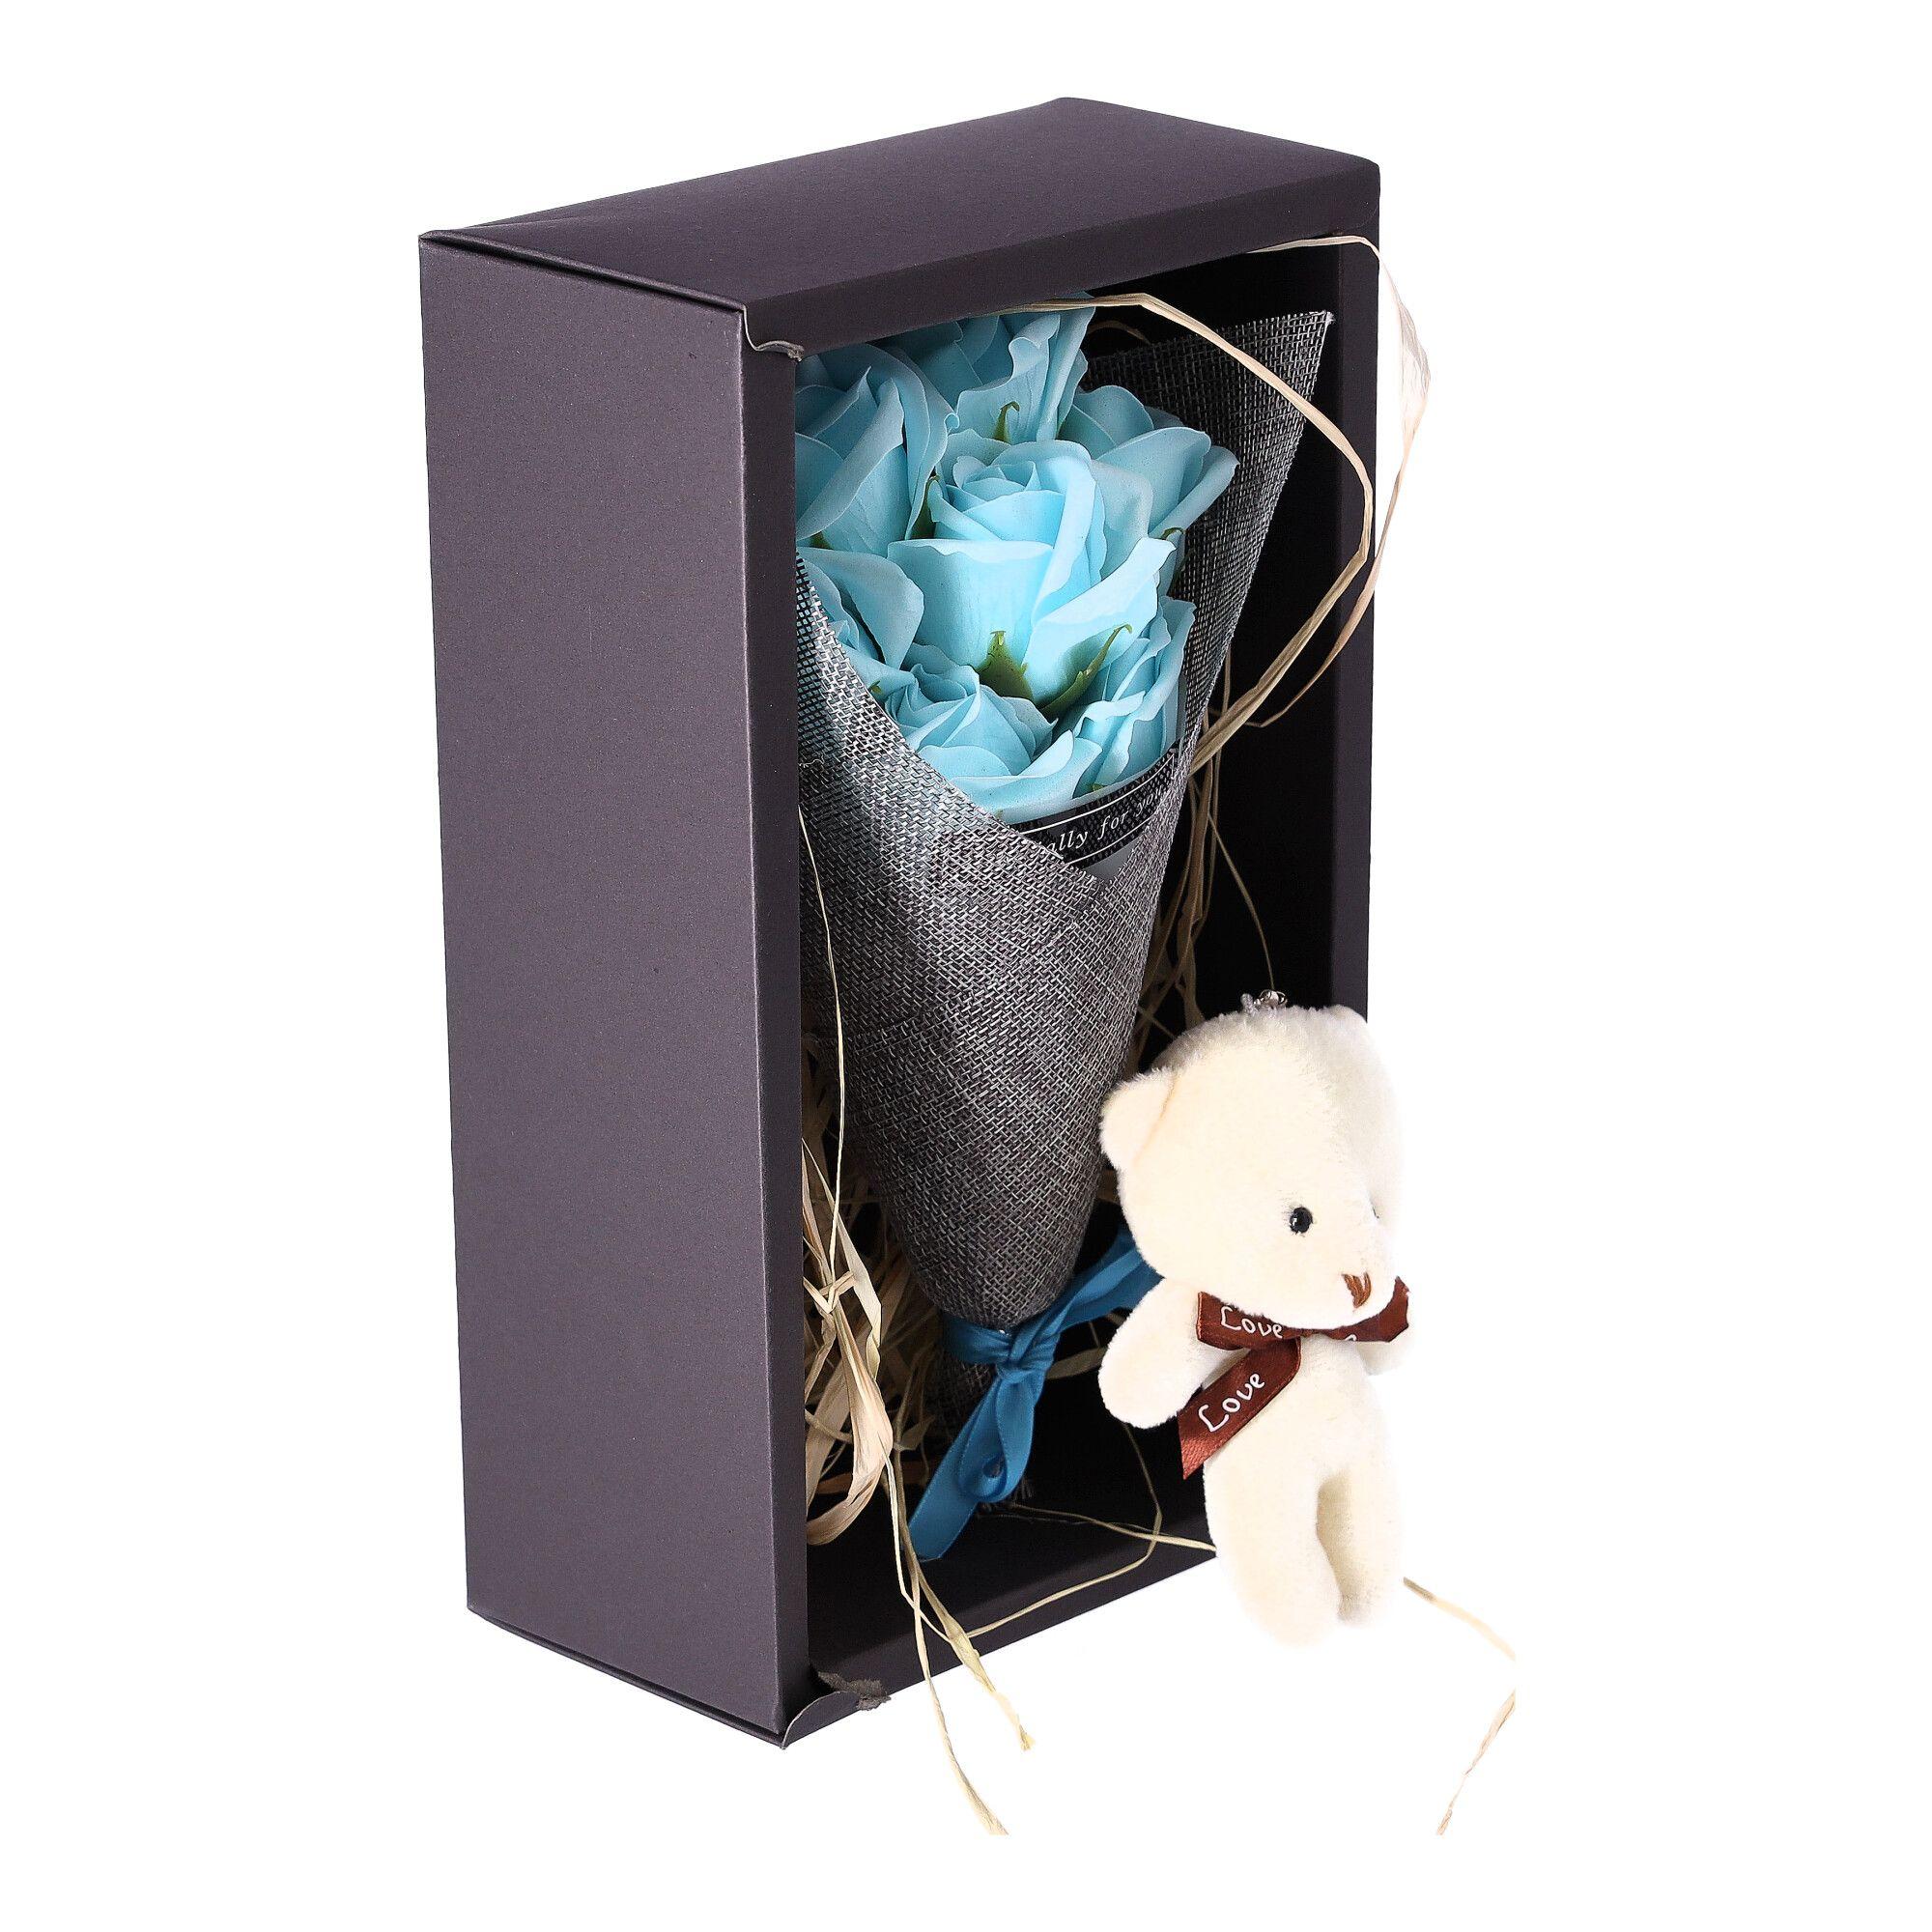 Box of soap roses - blue